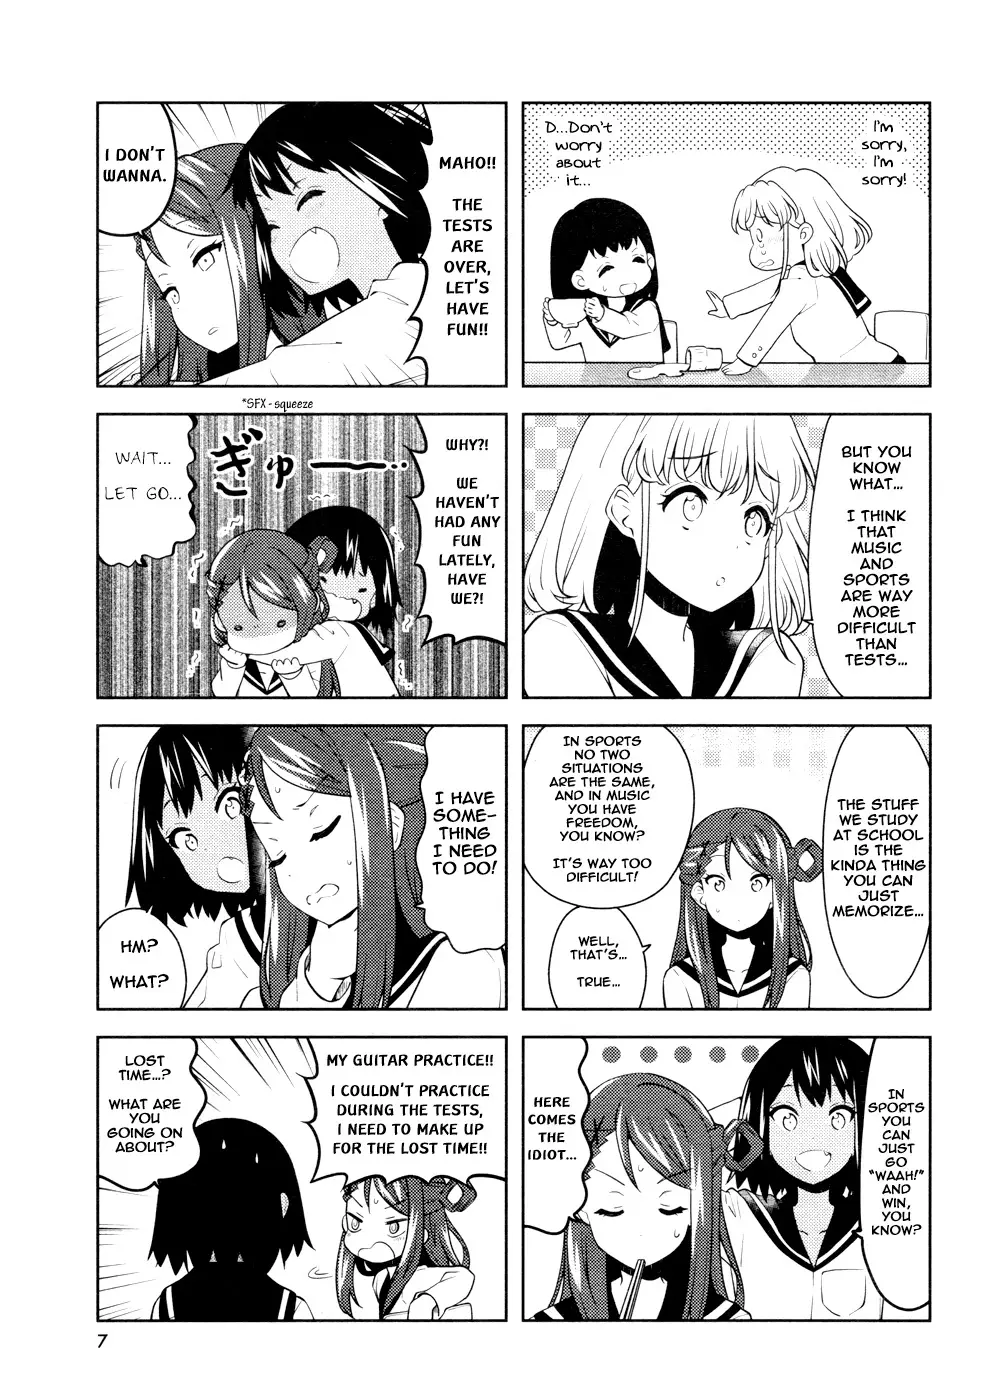 K-On! Shuffle - 11 page 3